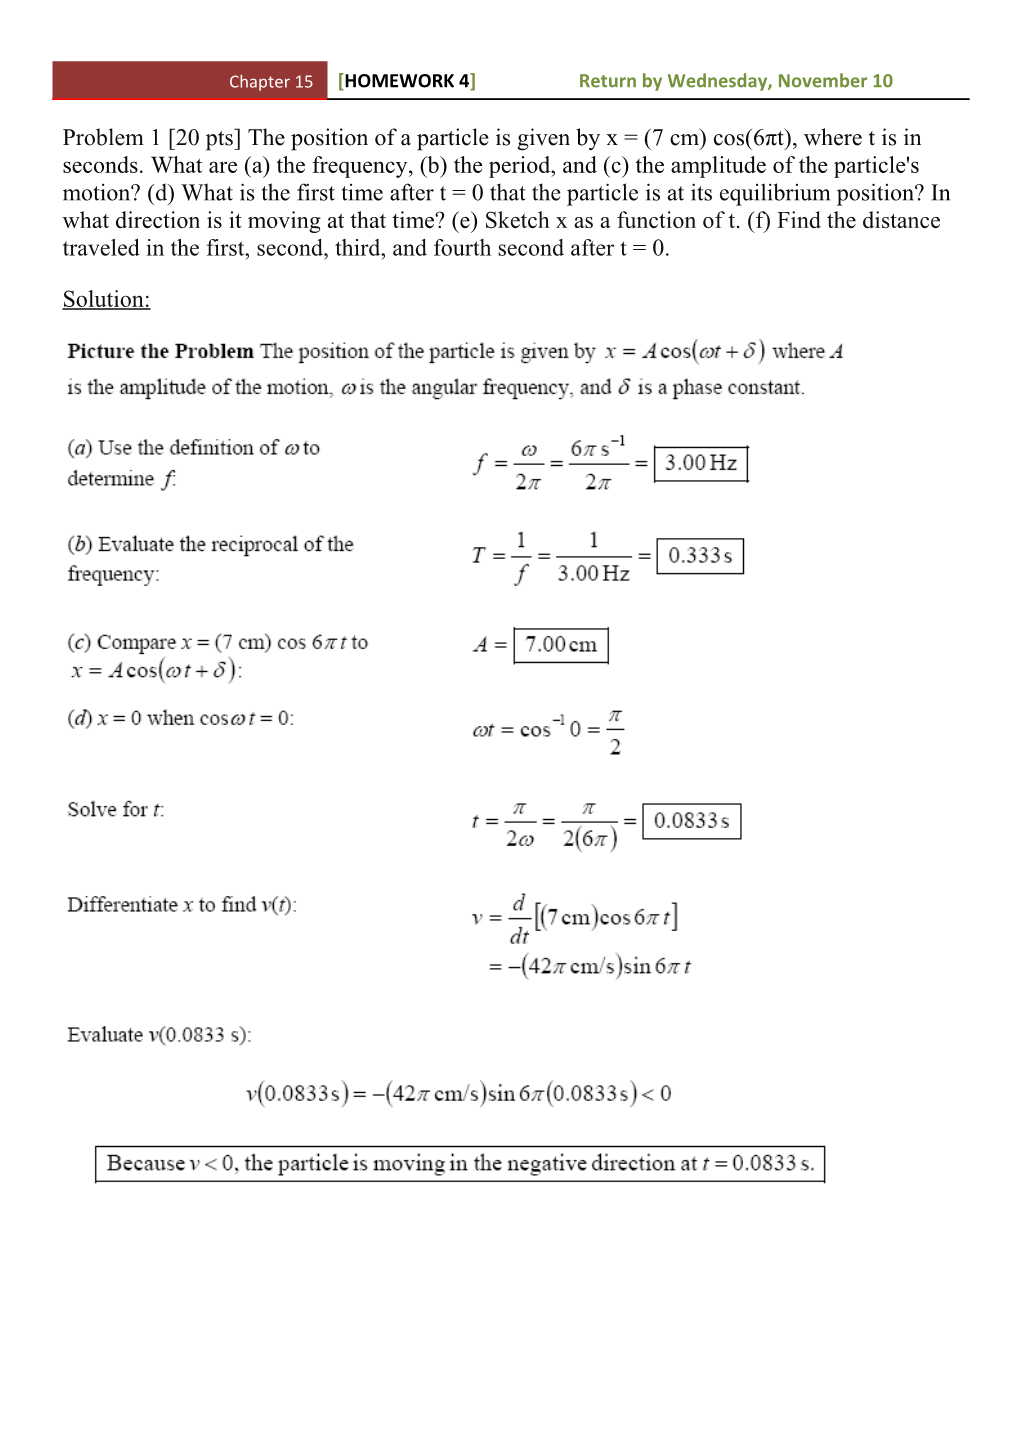 Problem 1 20 Pts the Position of a Particle Is Given by X = (7 Cm) Cos(6Πt), Where T Is